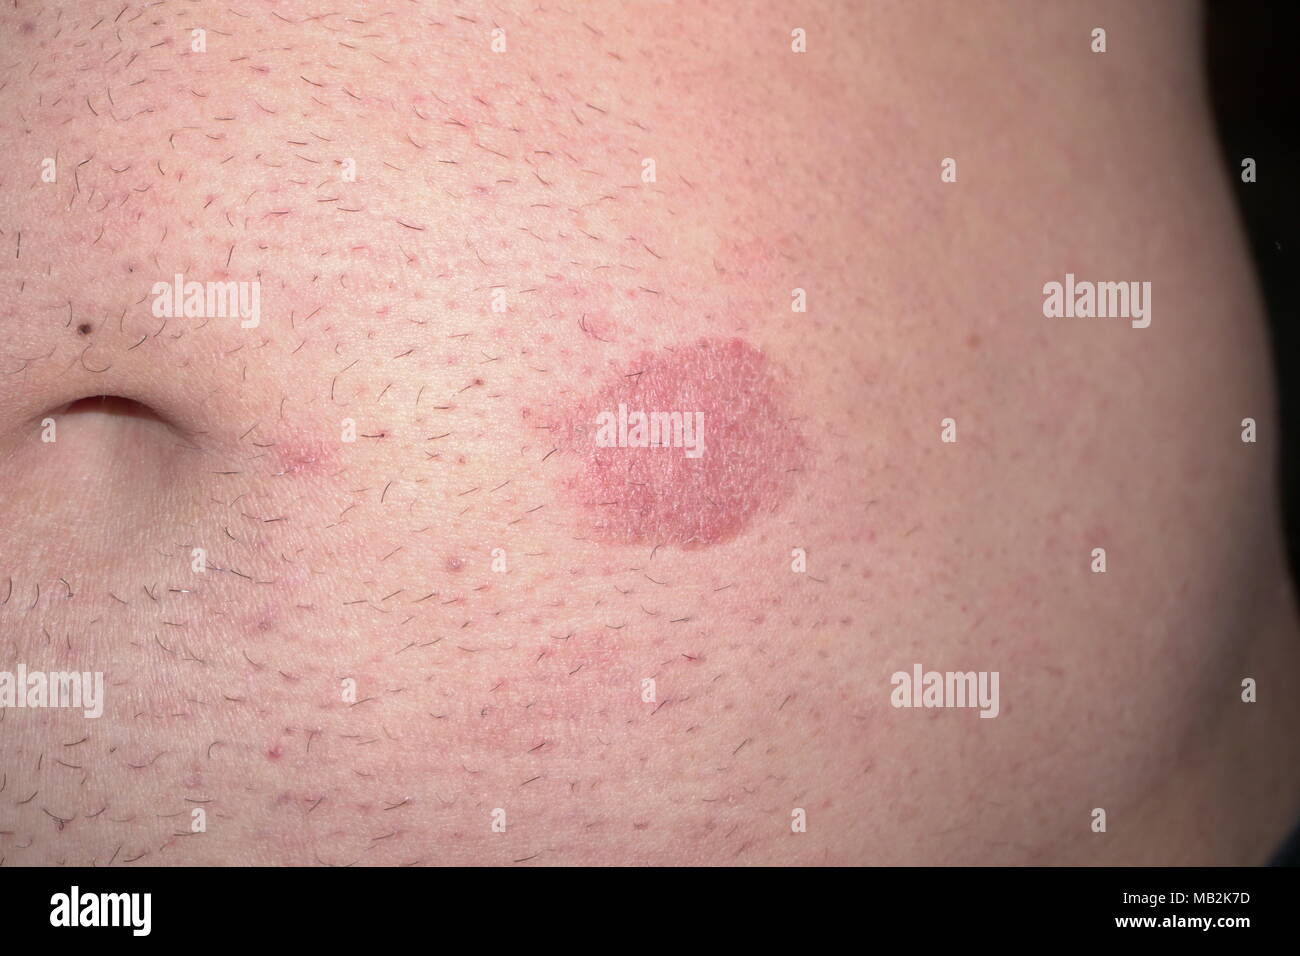 Typical skin spots from Mycosis fungoides sease Stock Photo